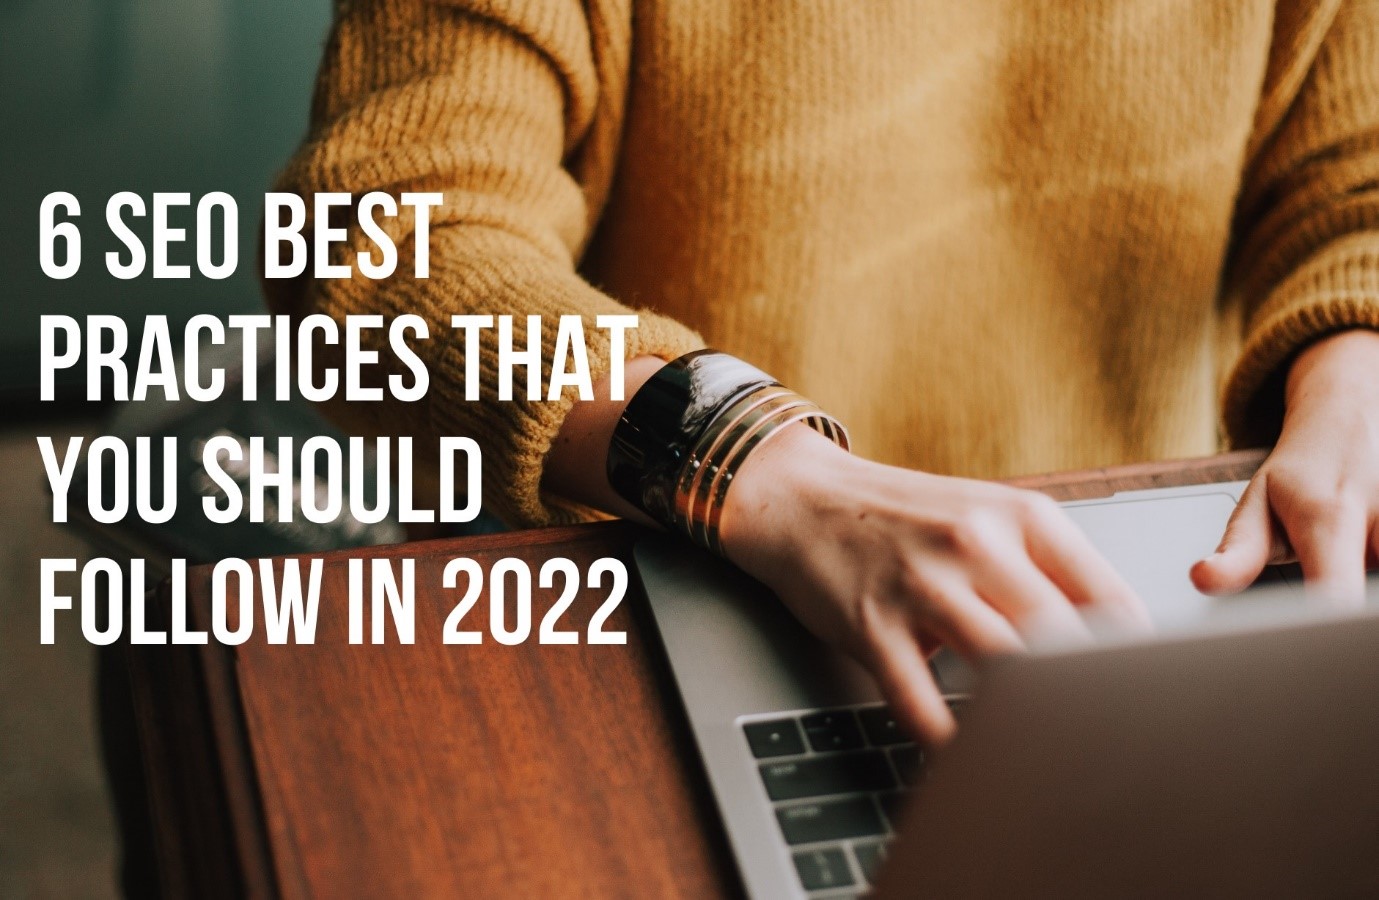 6 SEO Best Practices That You Should Follow in 2022